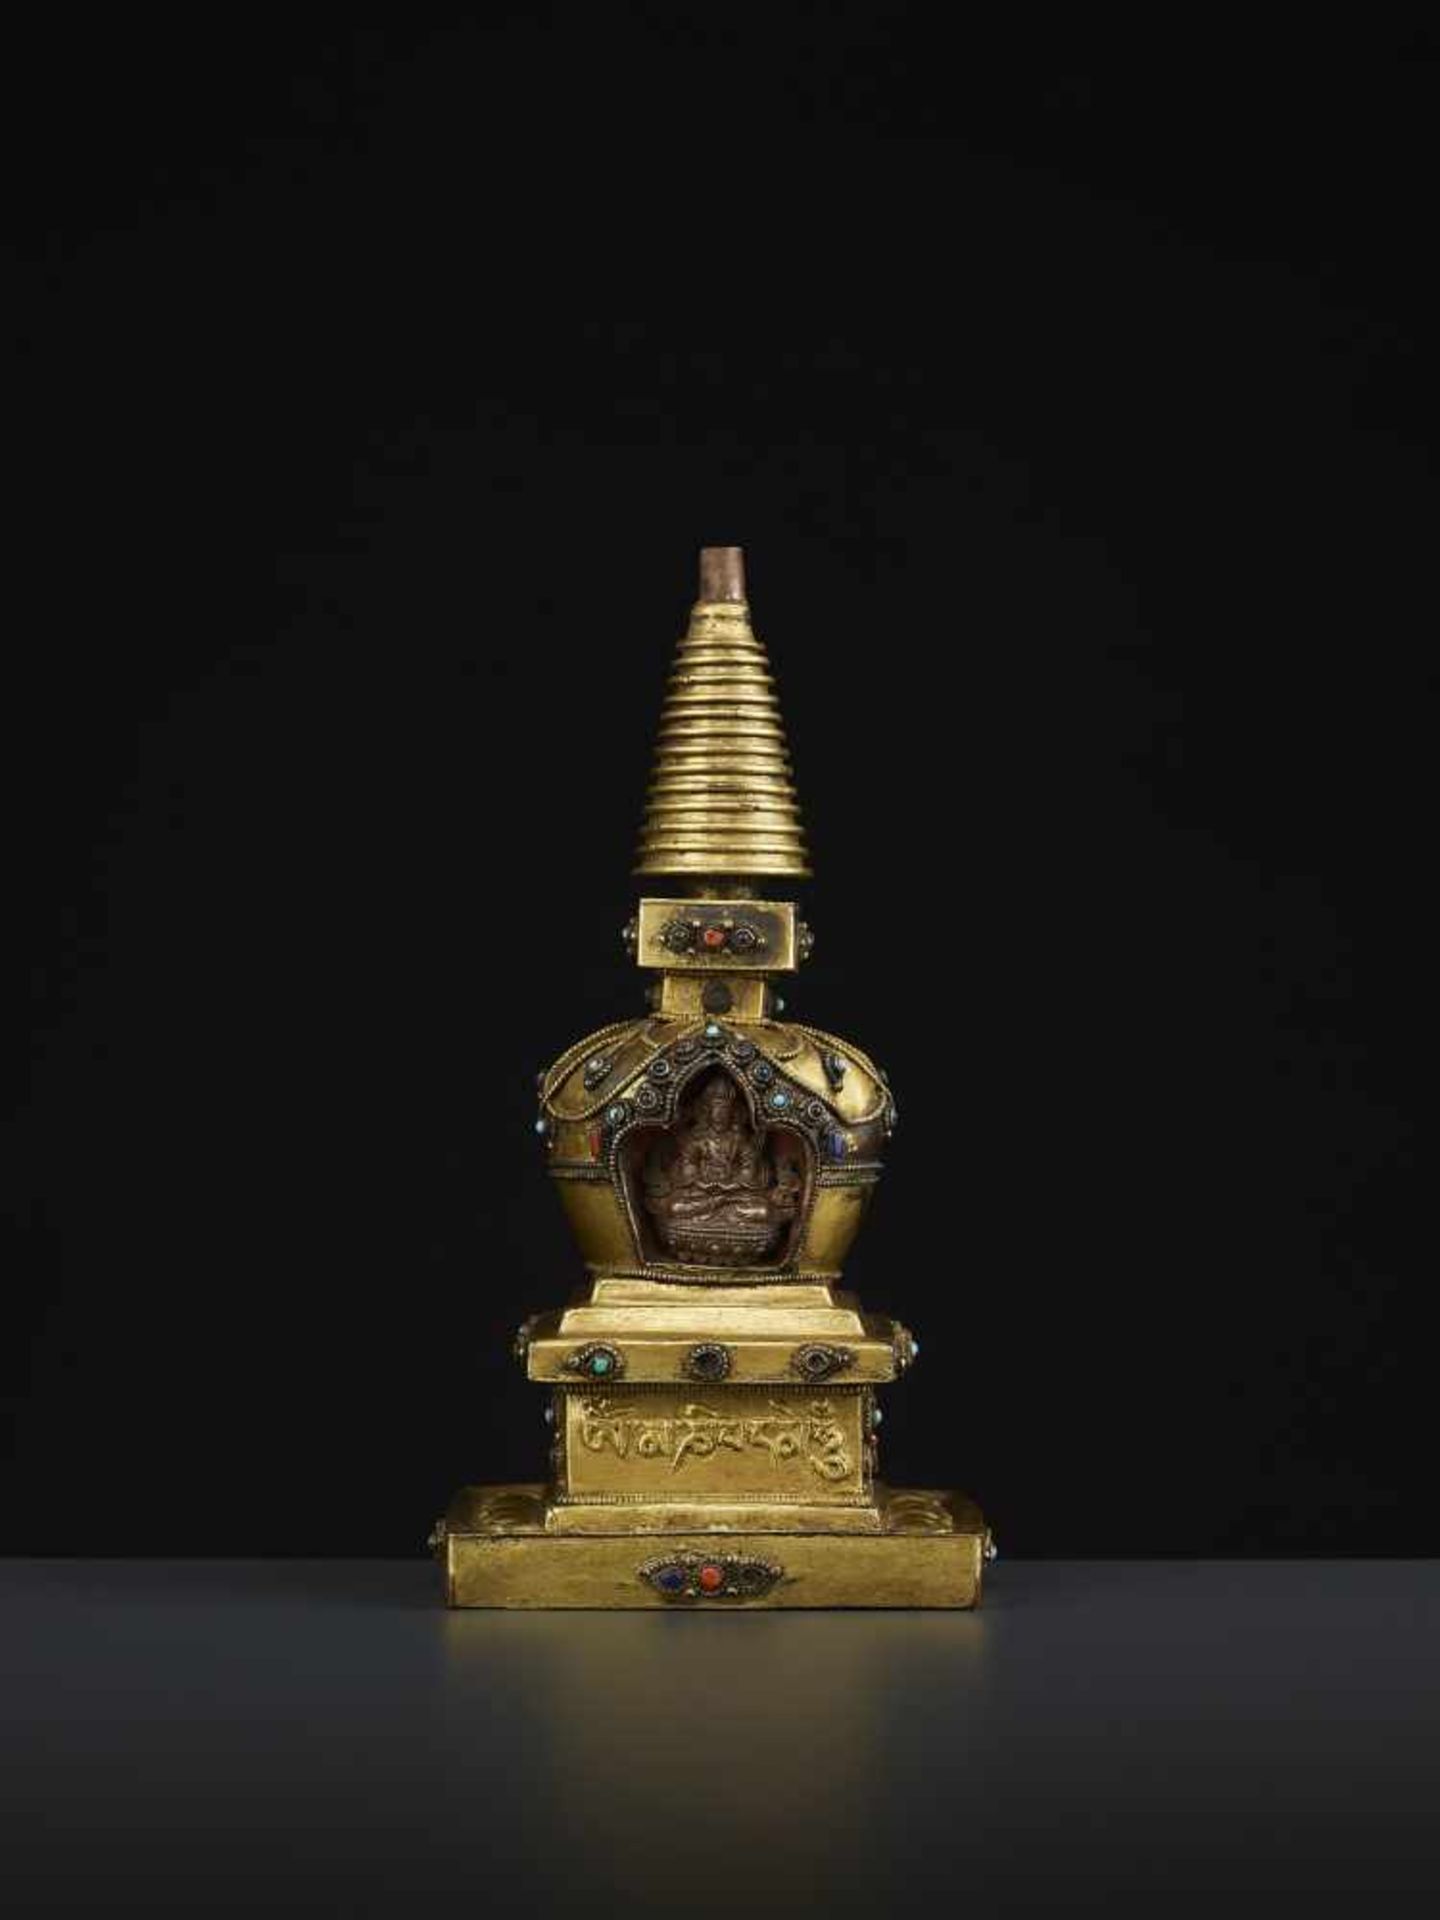 A REPOUSSE STUPA 18TH CENTURYTibet, 18TH to earlier 19TH century. A fire-gilt copper model of a - Image 3 of 11